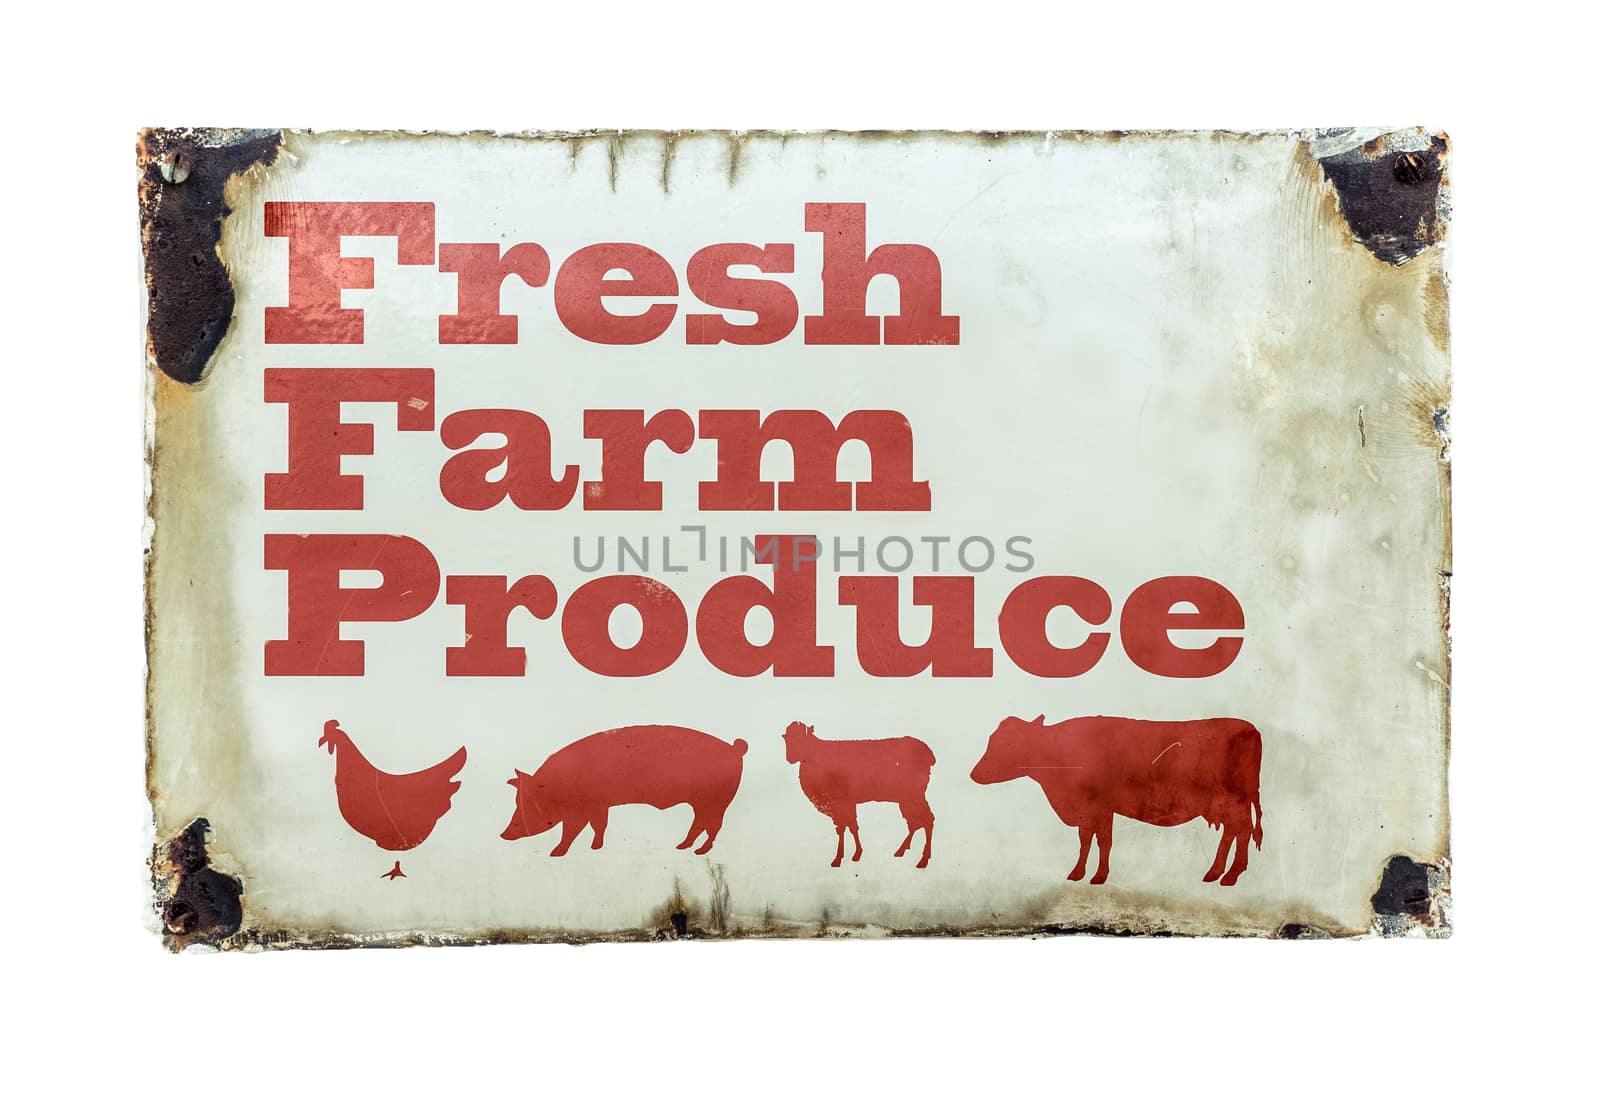 Grungy Rustic Vintage Sign For Fresh Farm Produce